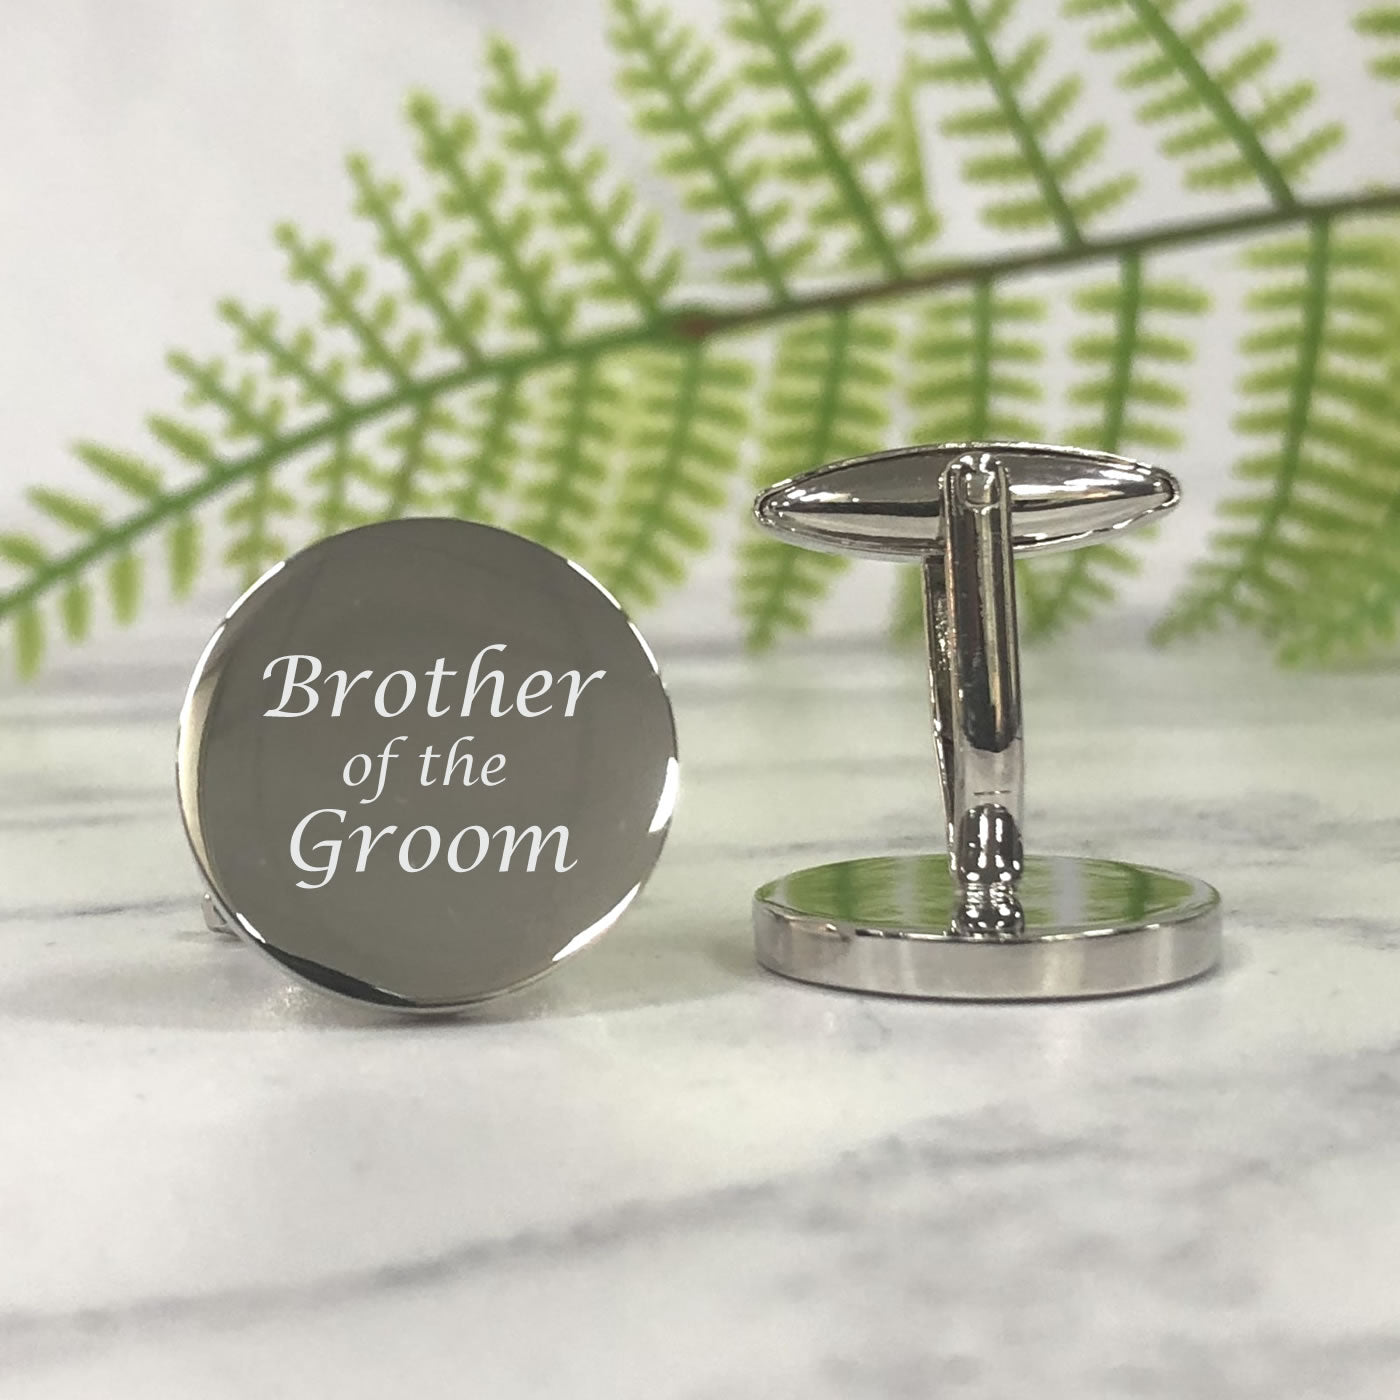 Personalised Round Wedding Cufflinks - Brother Of The Groom